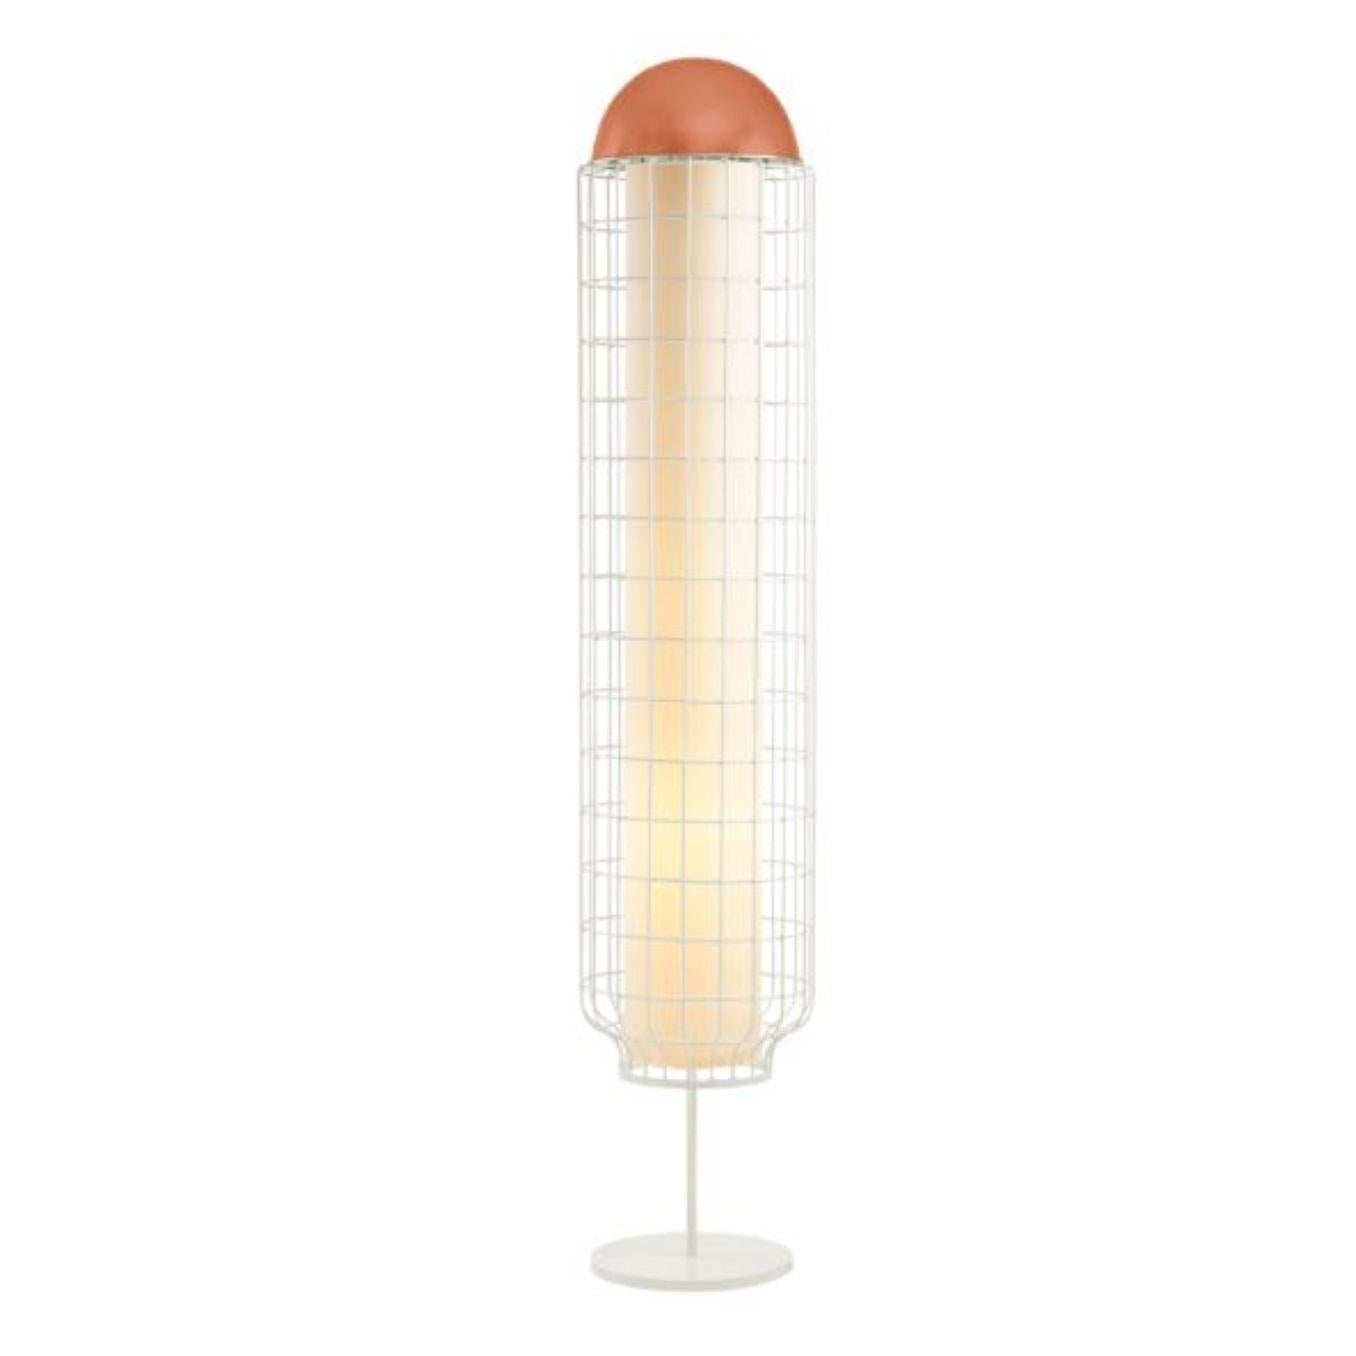 Salmon and ivory Magnolia floor lamp by Dooq
Dimensions: W 37 x D 37 x H 170 cm
Materials: lacquered metal, polished or brushed metal.
abat-jour: cotton
Also available in different colours and materials.

Information:
230V/50Hz
E27/2x20W